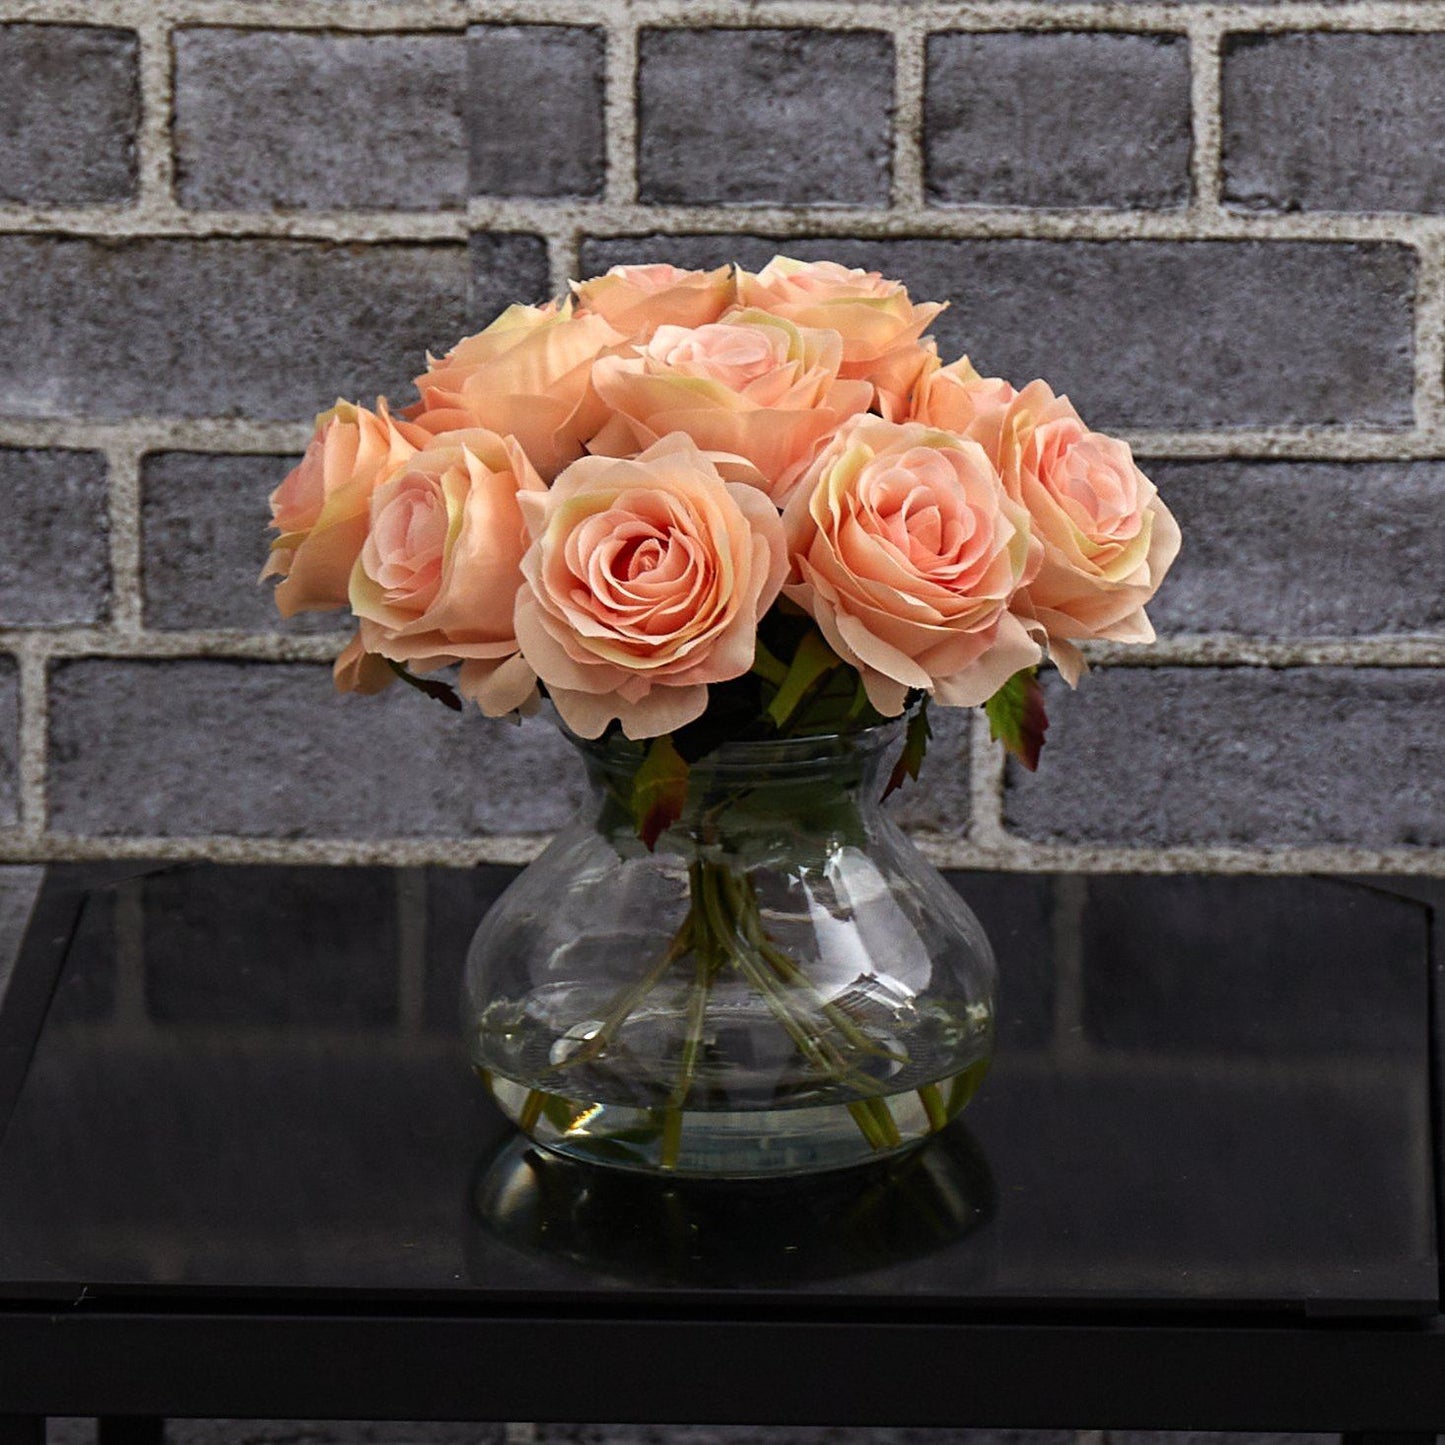 Rose Arrangement w/Vase by Nearly Natural